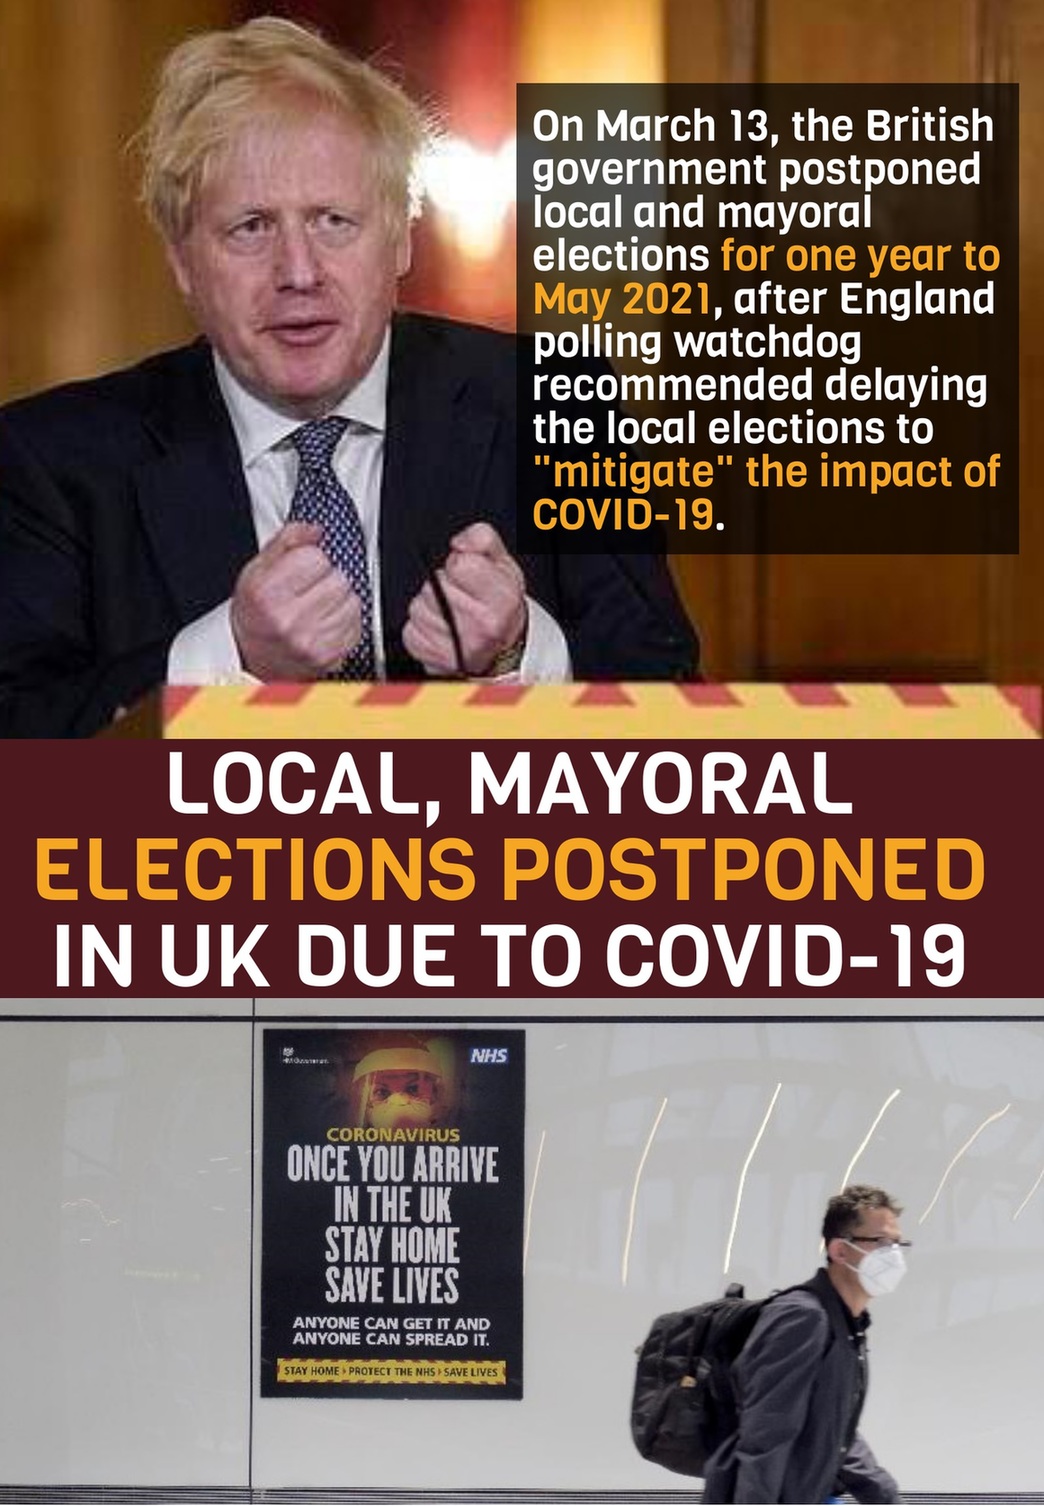 Local, mayoral elections postponed in UK due to COVID-19